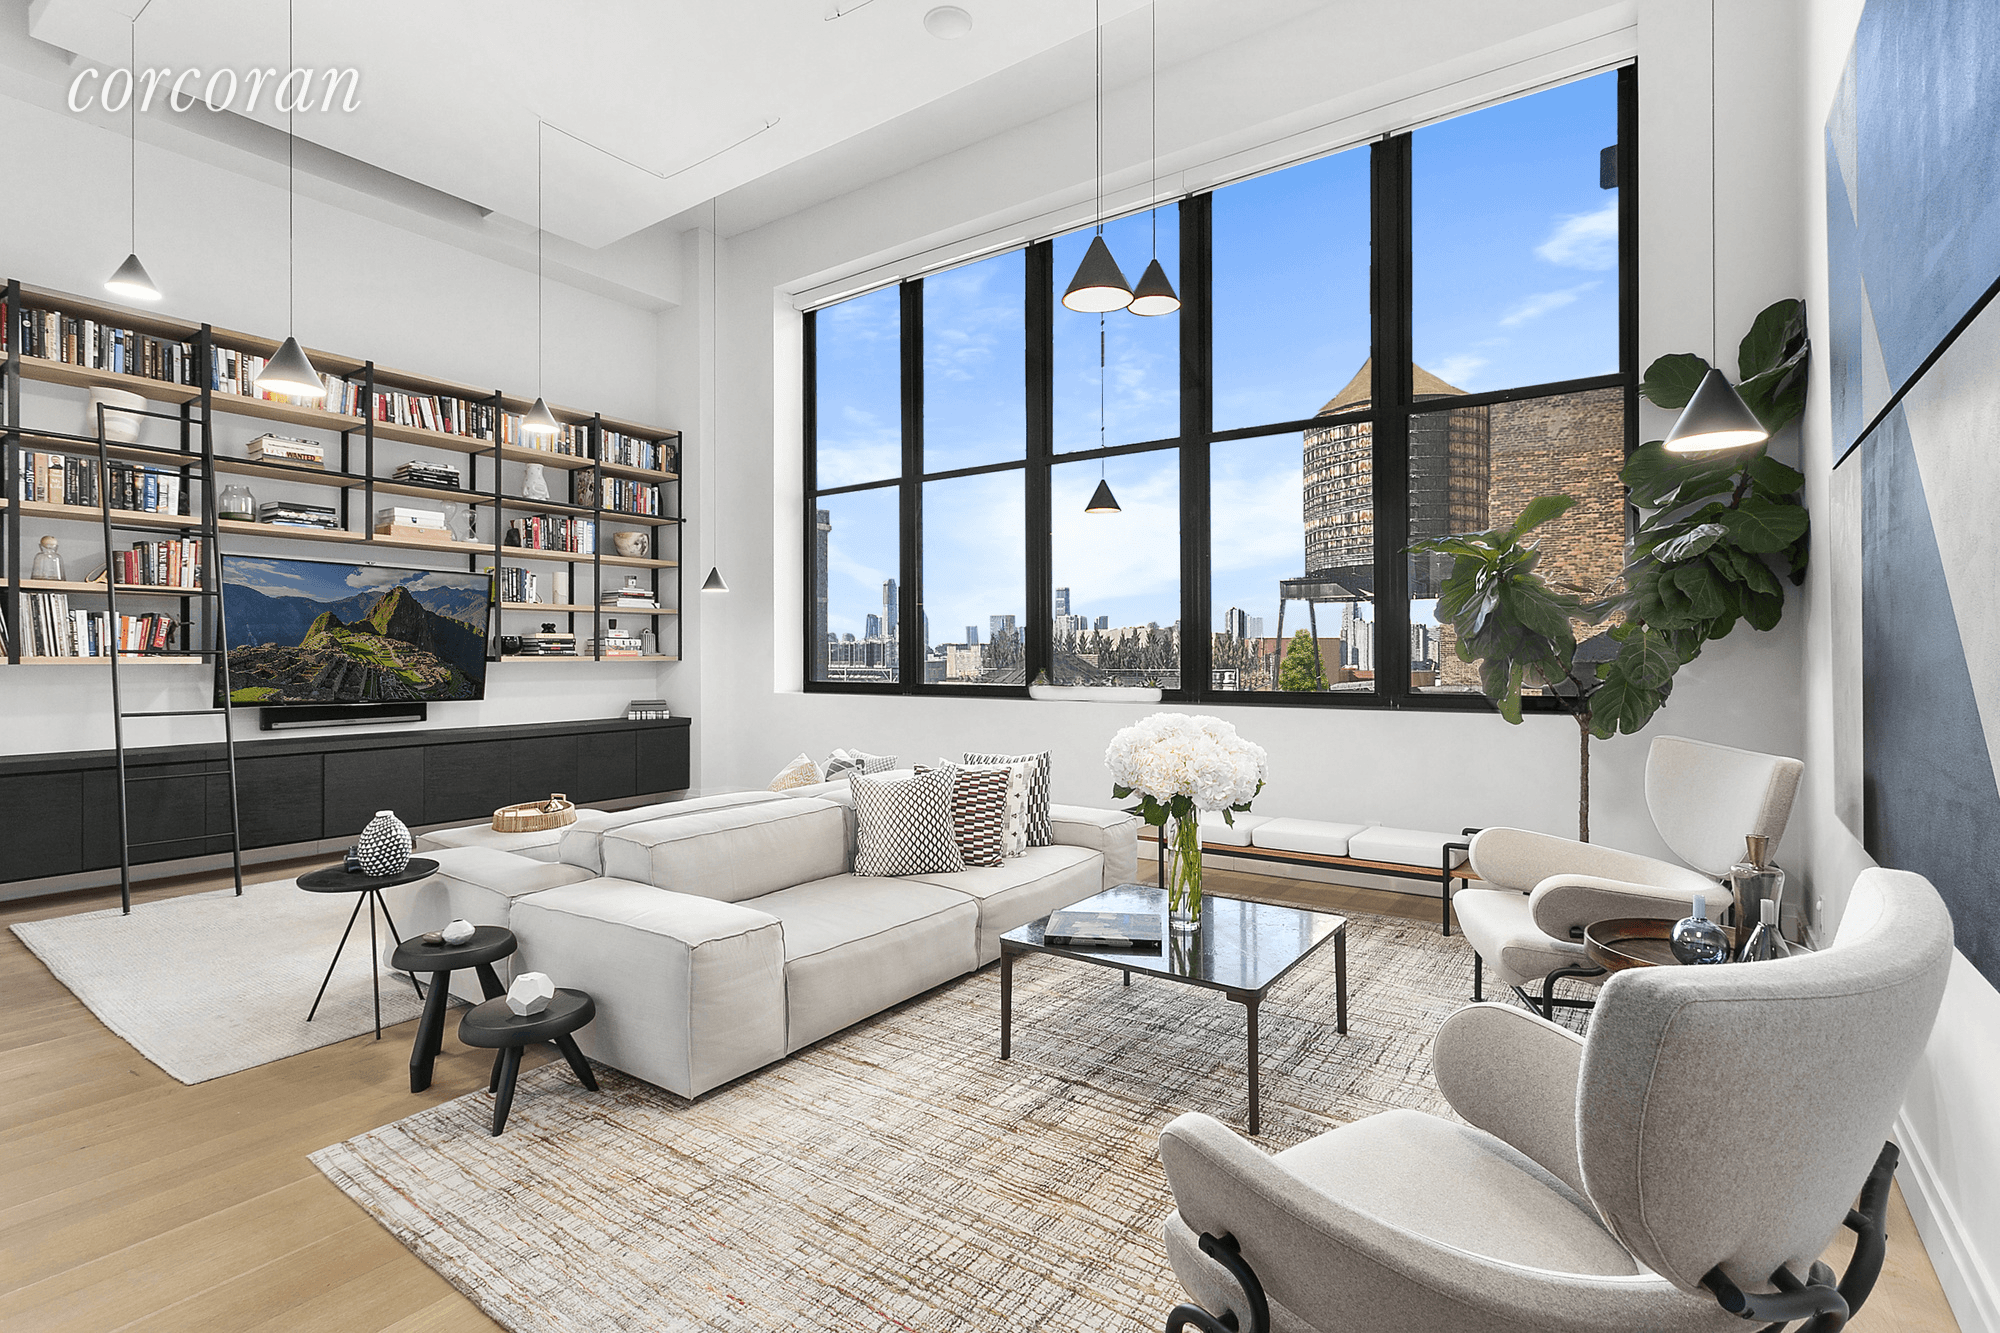 With approximately 2, 524sf of living space, this triple mint three bedroom, three and a half bathroom duplex loft epitomizes the finest qualities of gracious downtown living.